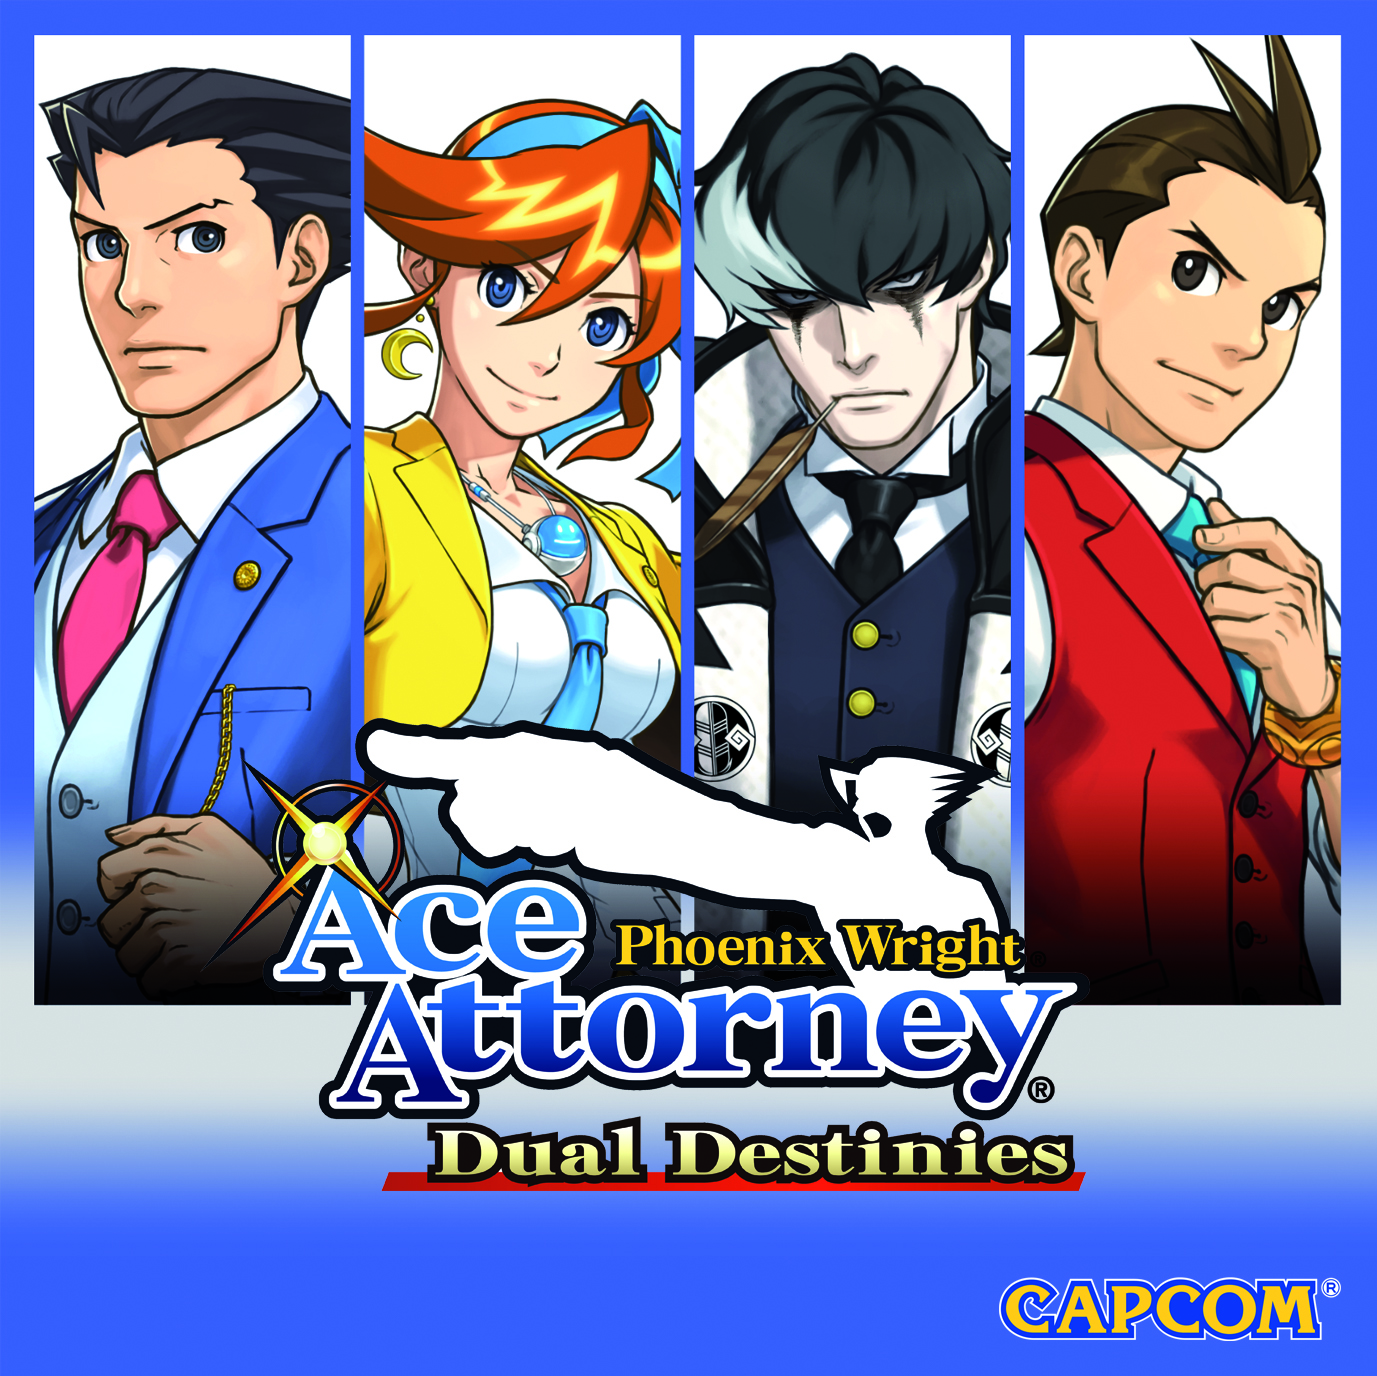 Phoenix wright ace attorney dual destinies nds rom download